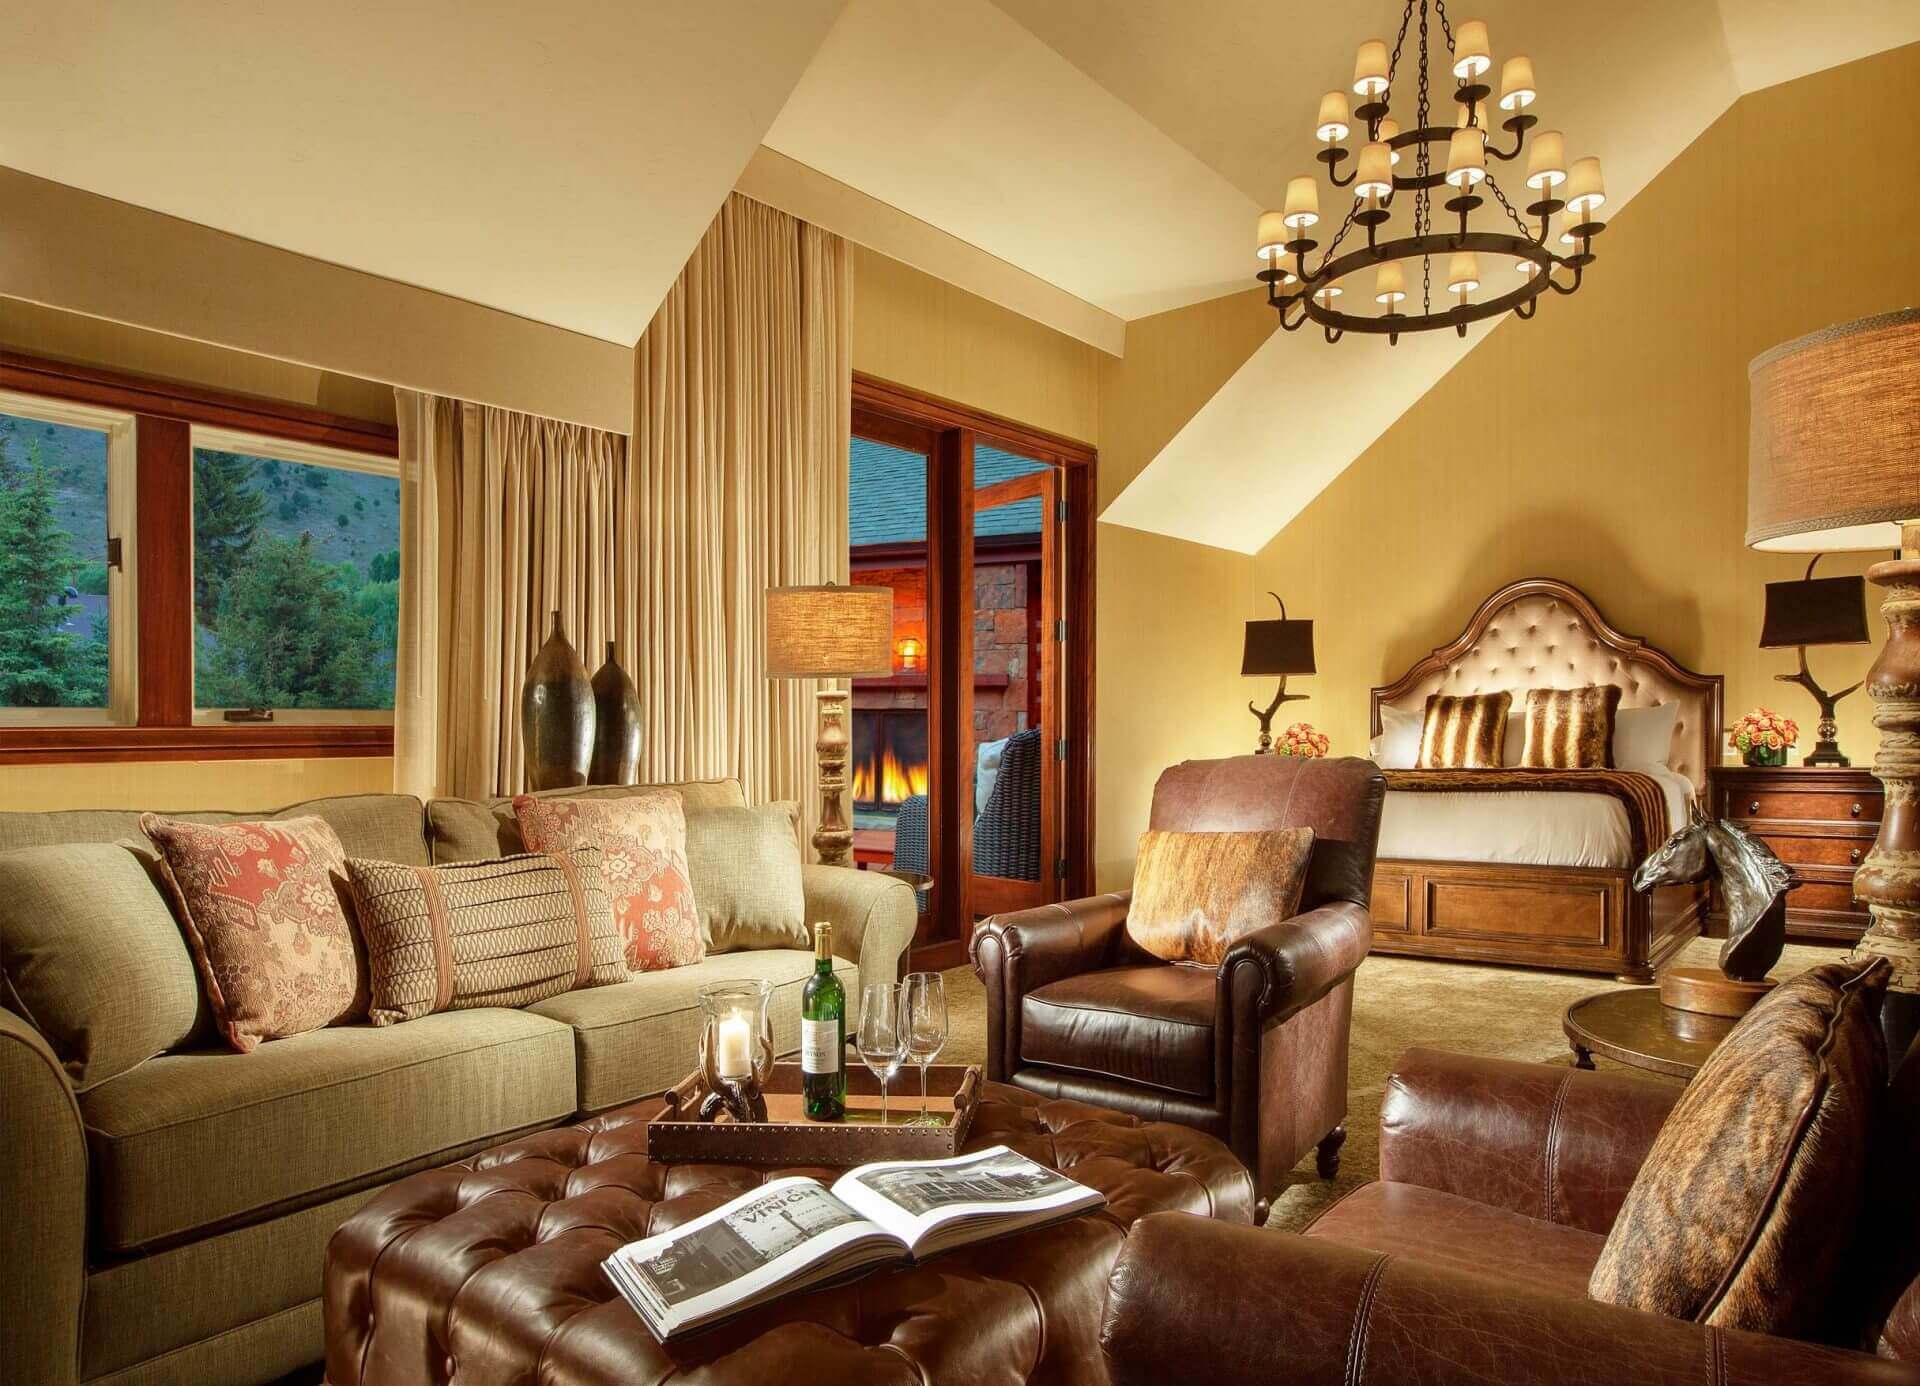 luxury hotel room with leather couches, king sized bed and outdoor fireplace